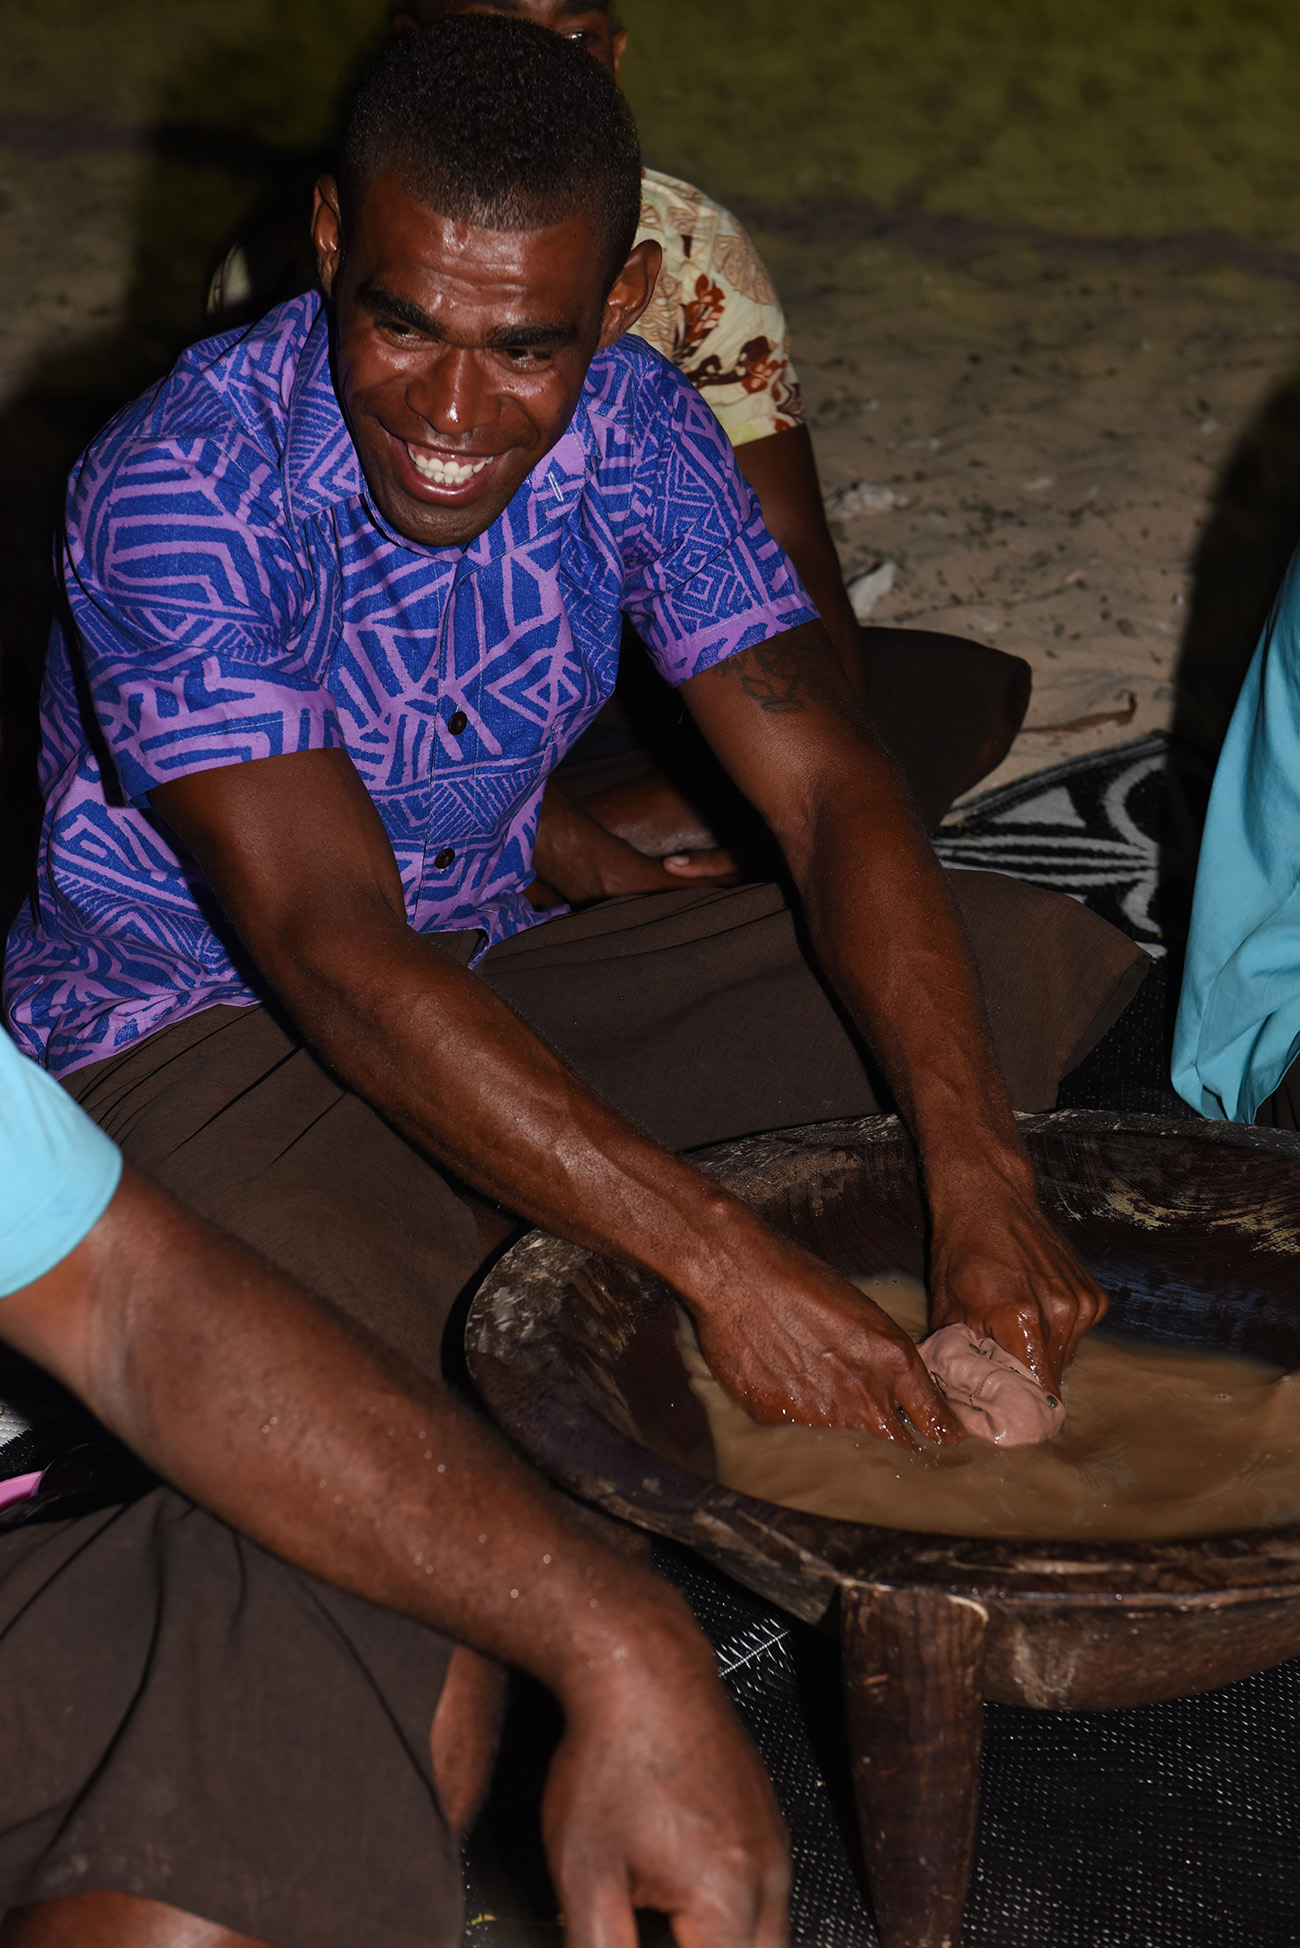 A Fijian is getting the mix ready for the kava ceremony at Paradise Cove island resort in the Yasawas in Fiji photographed by Anais Photography